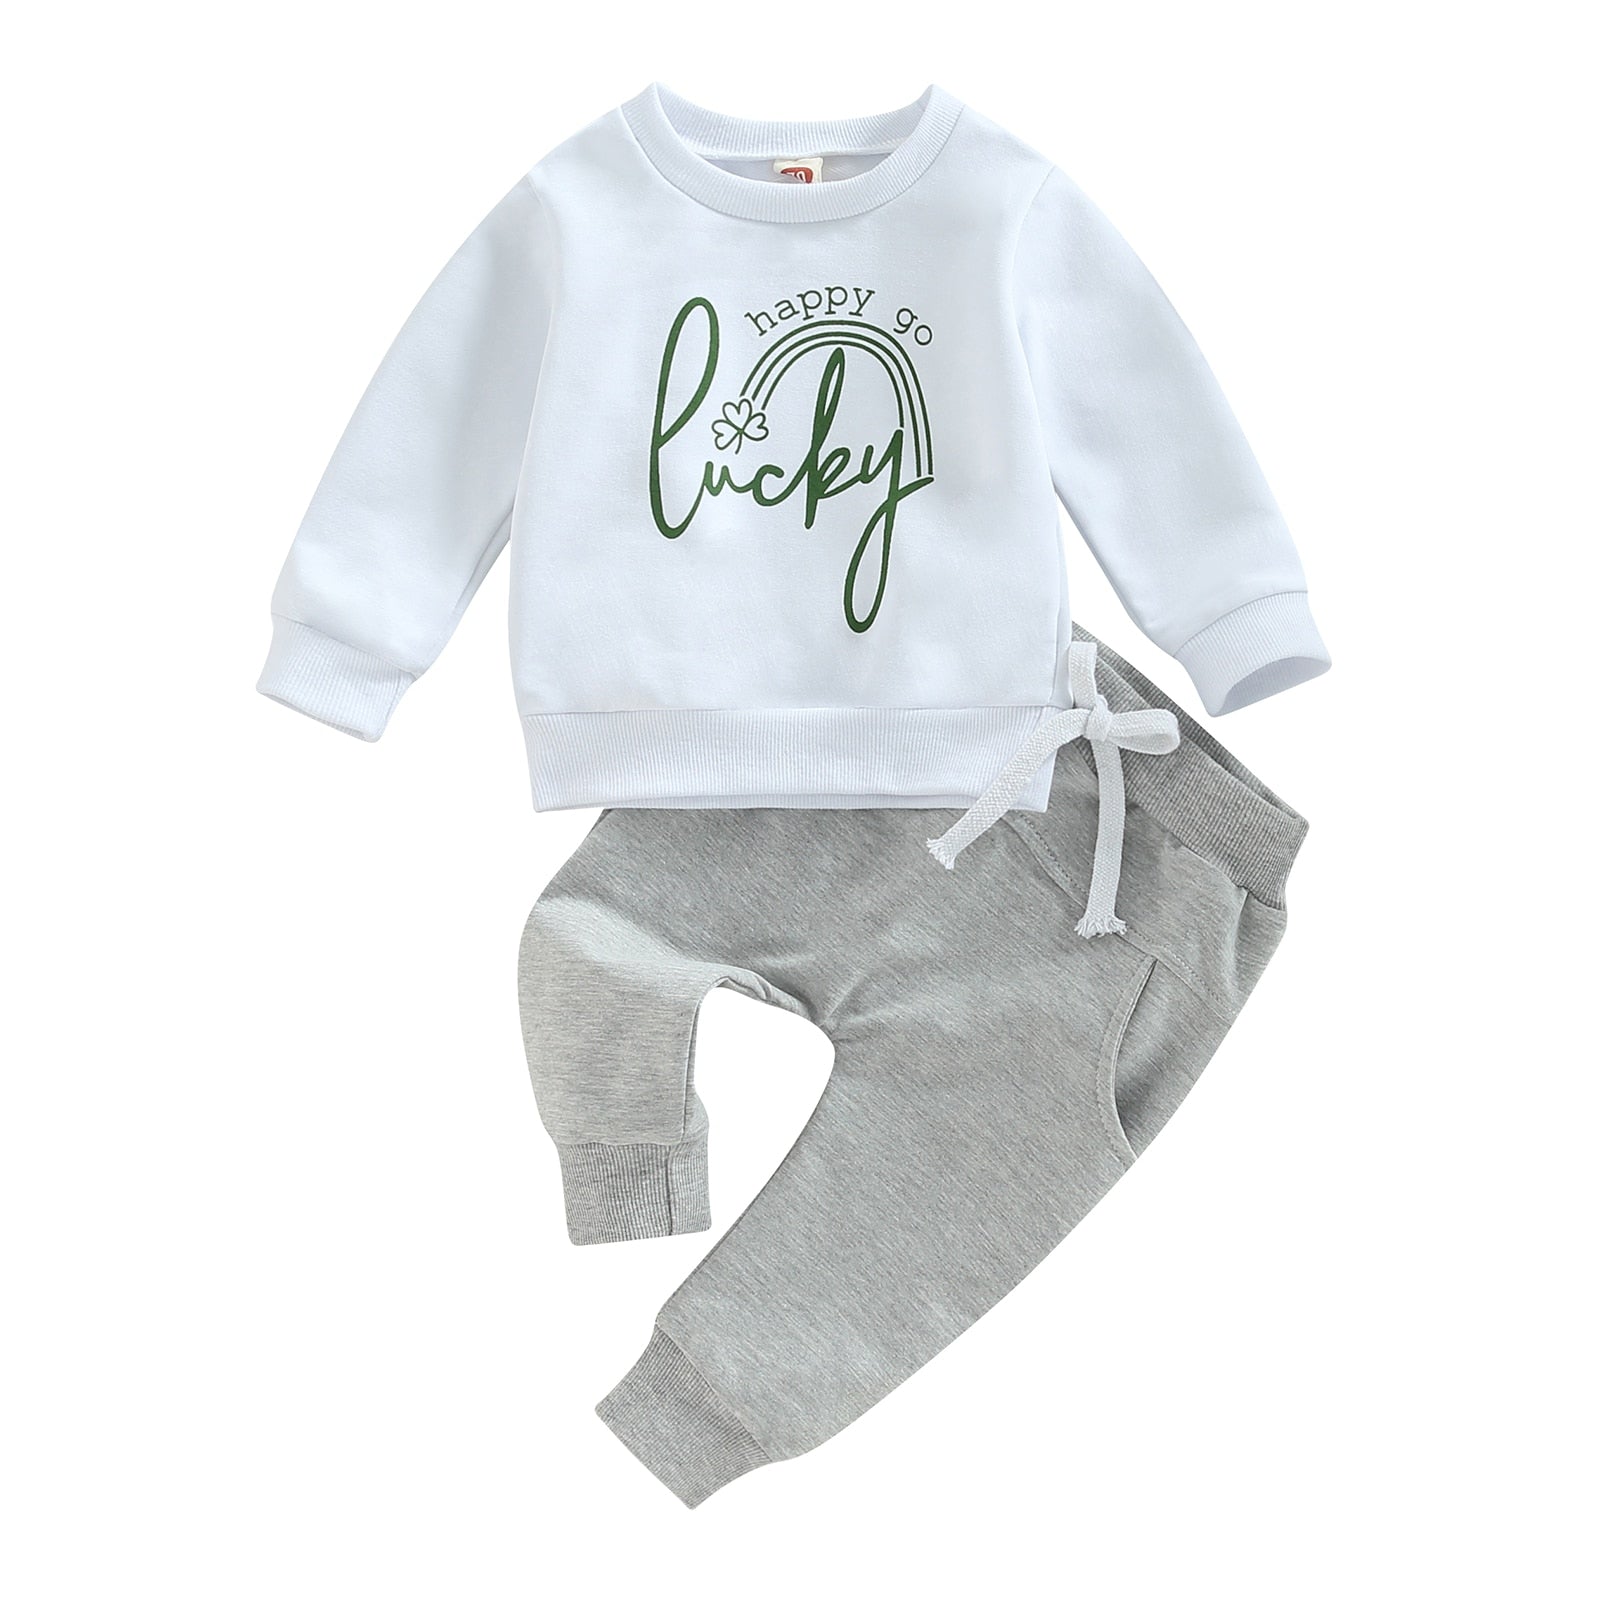 Adorable and Comfortable Spring Baby Clothes Sets for Boys and Girls